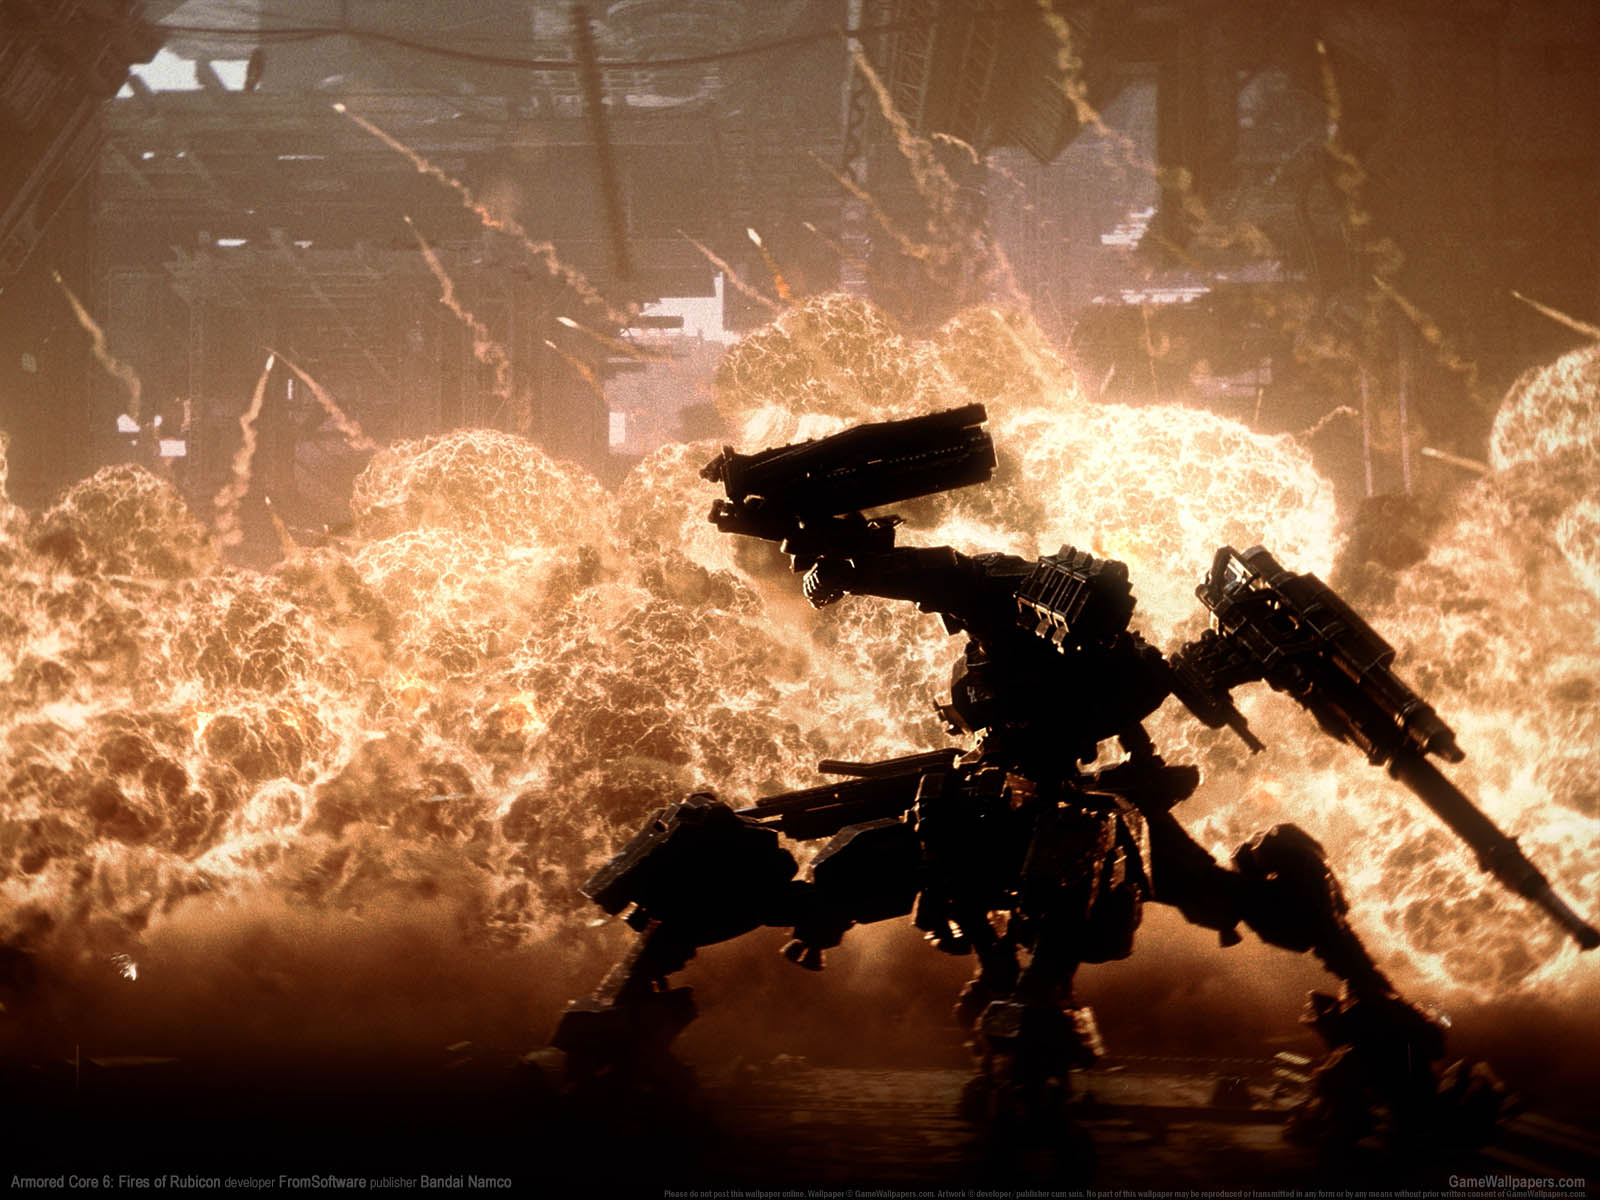 Armored Core 6%3A Fires of Rubicon fond d'cran 01 1600x1200